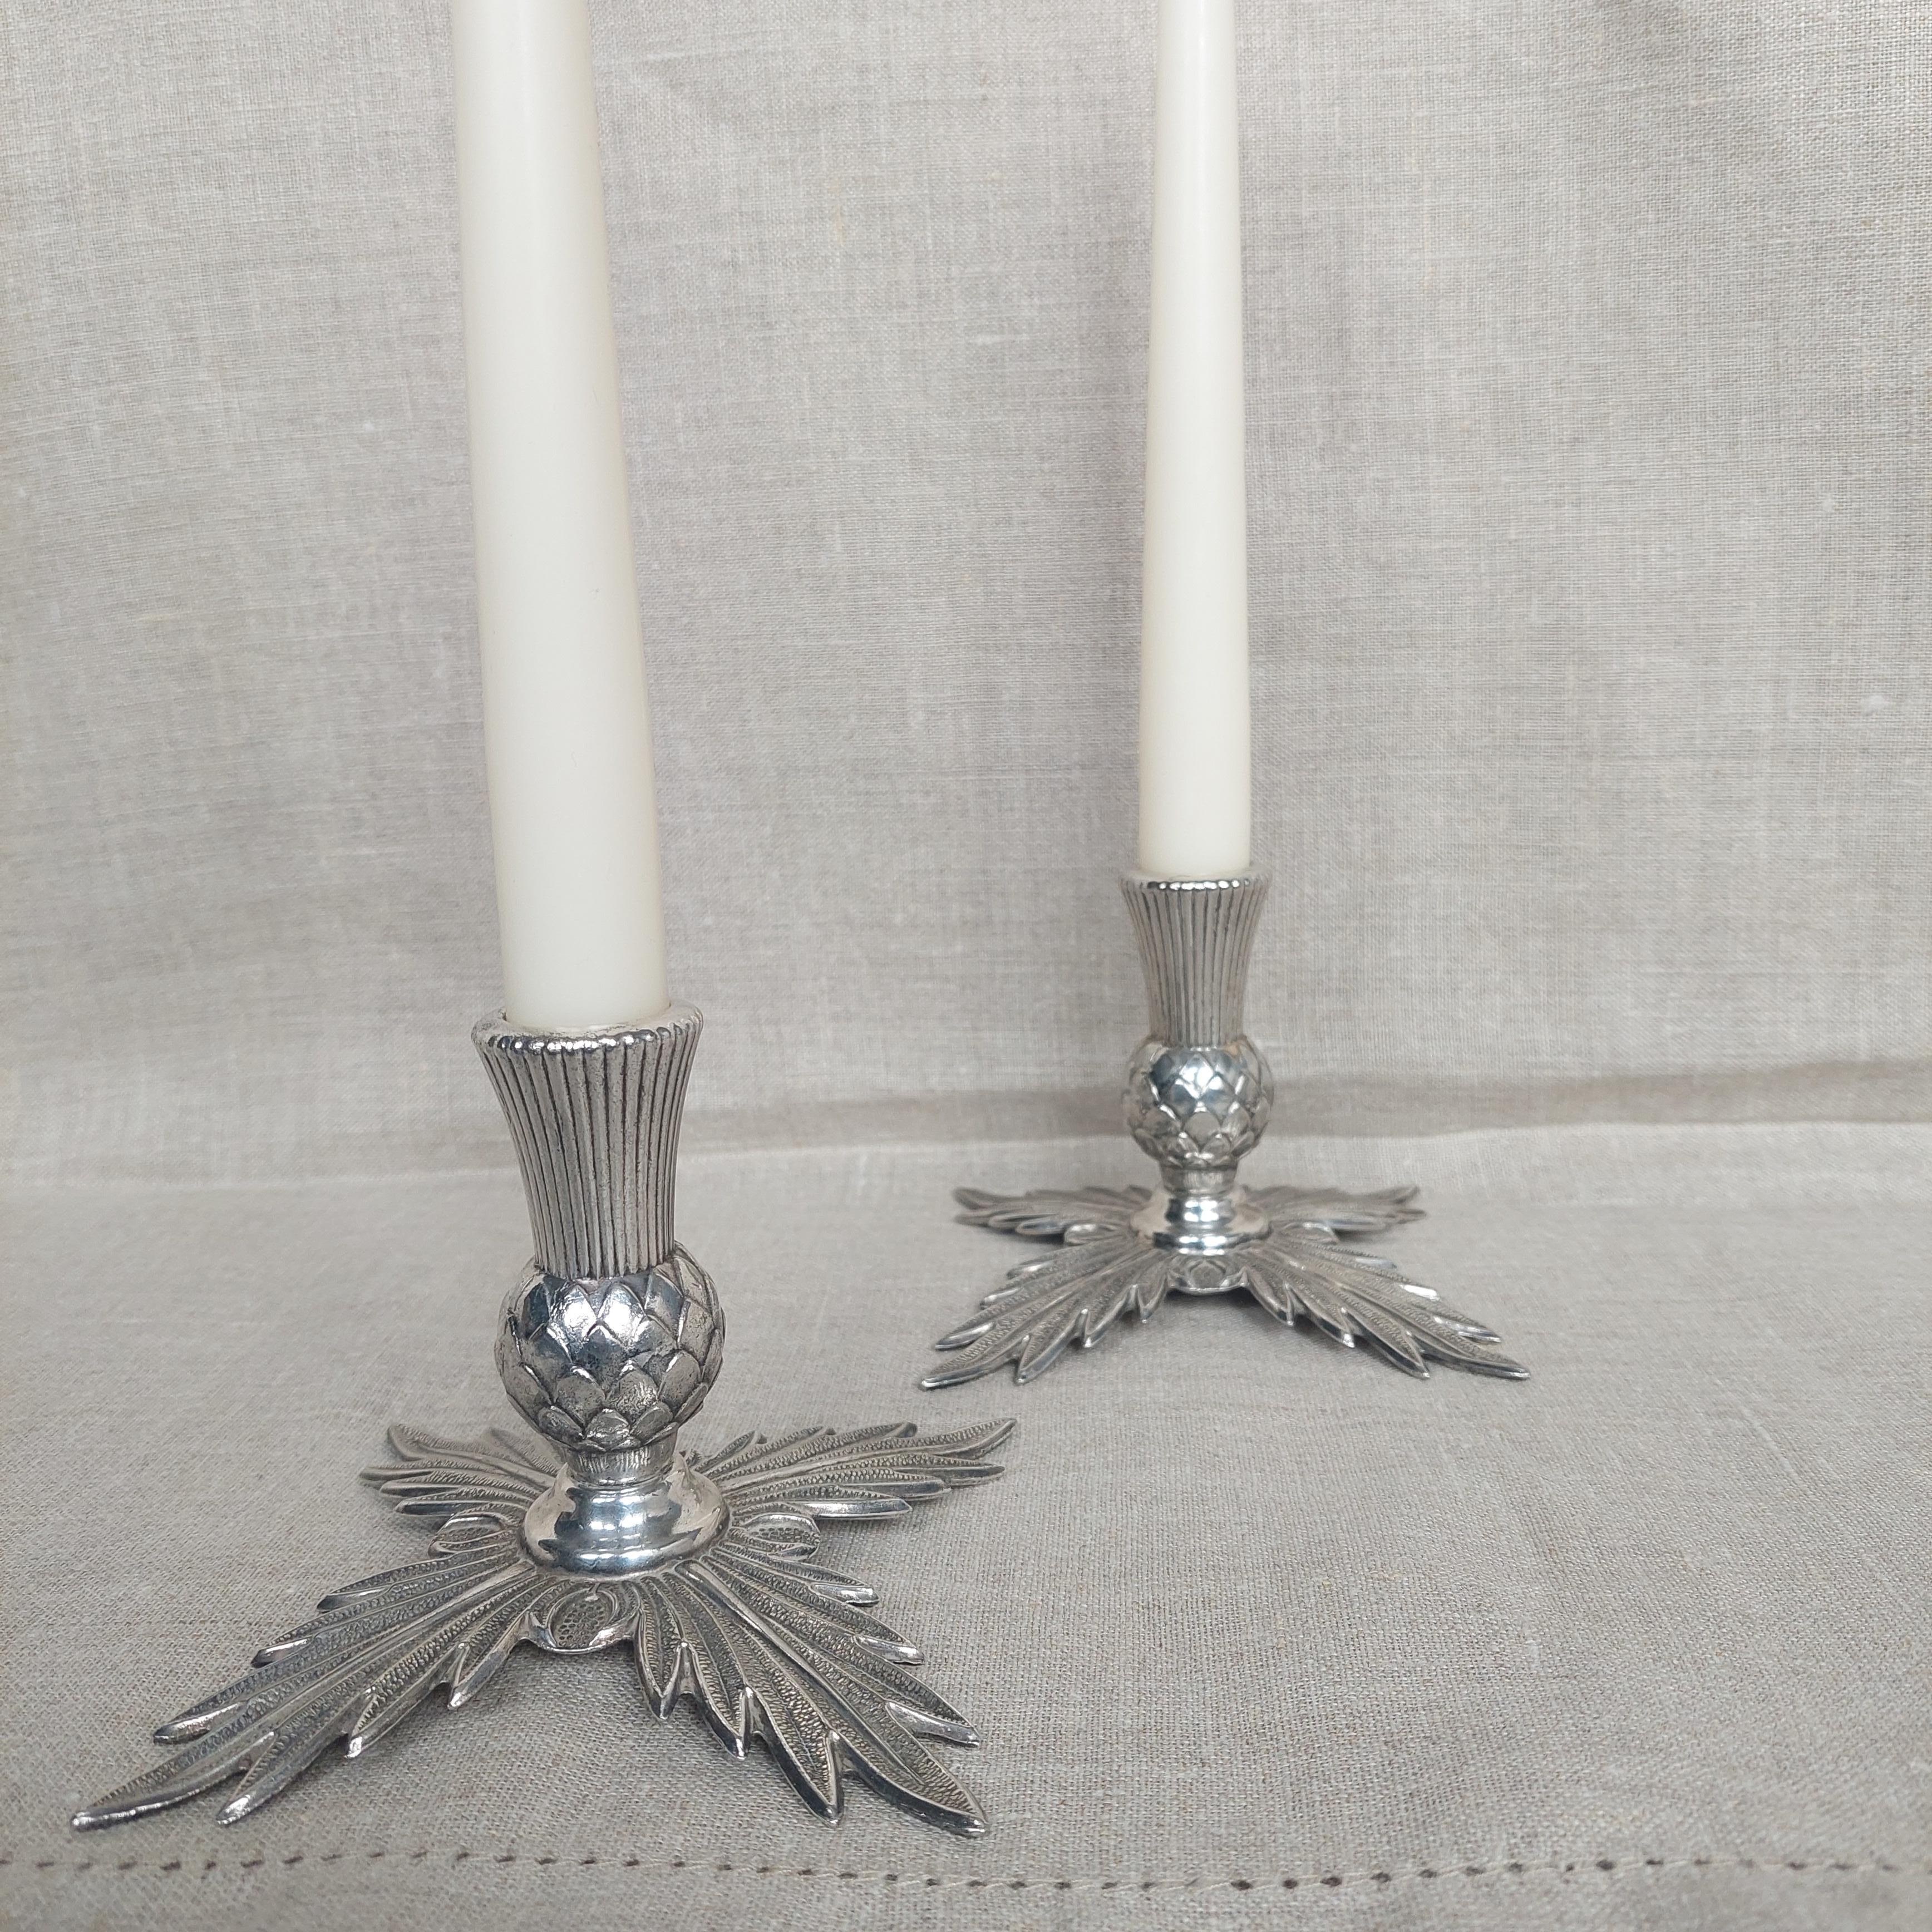 Vintage English Small Metal Thistle Styled Candlestick Holder Display Traditional British Ornament Display Candle c1940-50's 
Vintage Scottish style Thistle Shaped Metal Candlestick-IANTHE-Ian Hea.

Stunning 1940s handmade in England
Solid